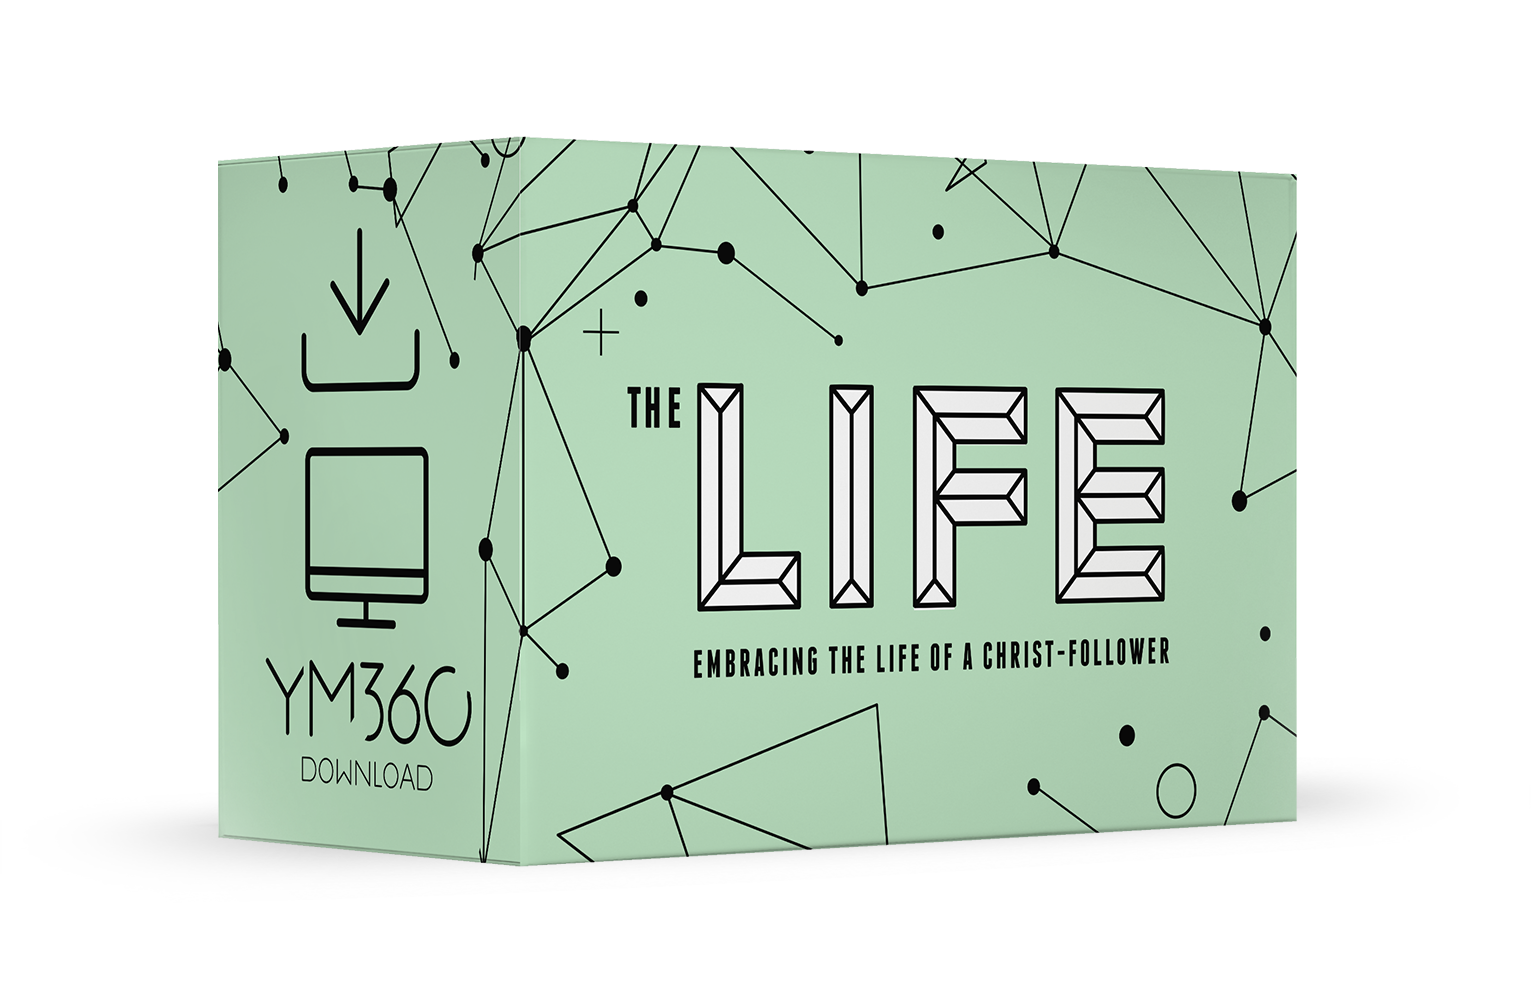 The Life: Embracing the Life of a Christ-Follower